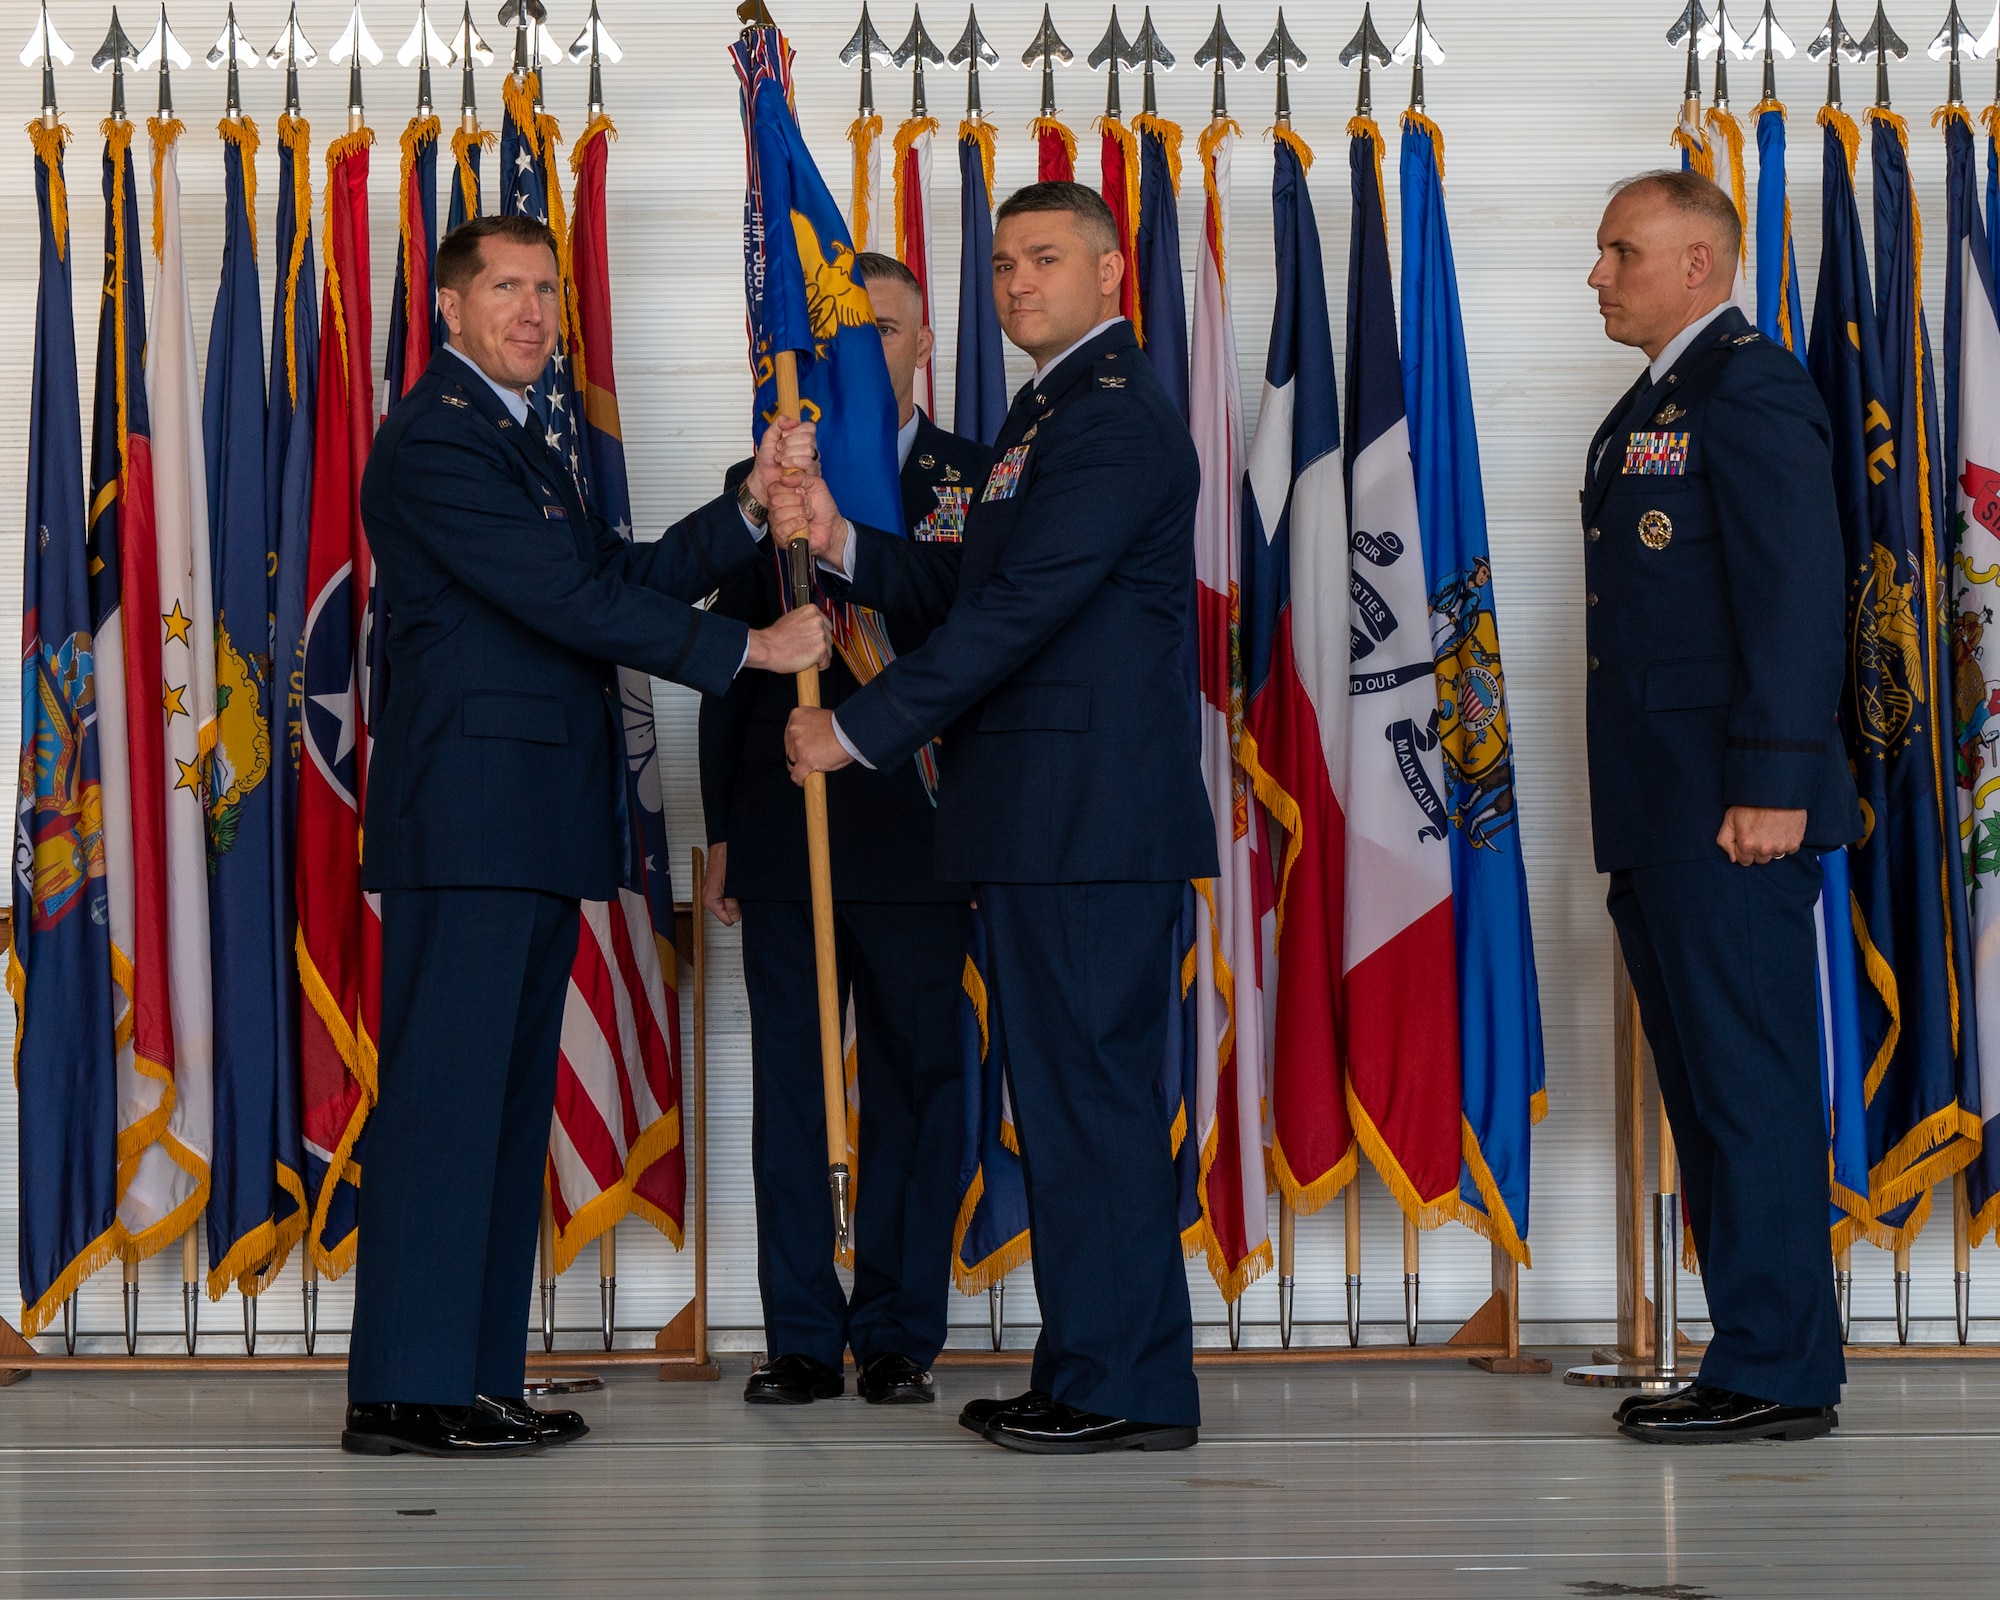 Col. Michael Maginess, outgoing 5th Mission Support Group (MSG) commander, gives his final remarks at the 5th MSG change of command ceremony at Minot Air Force Base, North Dakota, June 2, 2023. Col. Jerry Ottinger assumed command of the 5th MSG during the ceremony. (U.S. Air Force photo by Senior Airman Evan Lichtenhan)